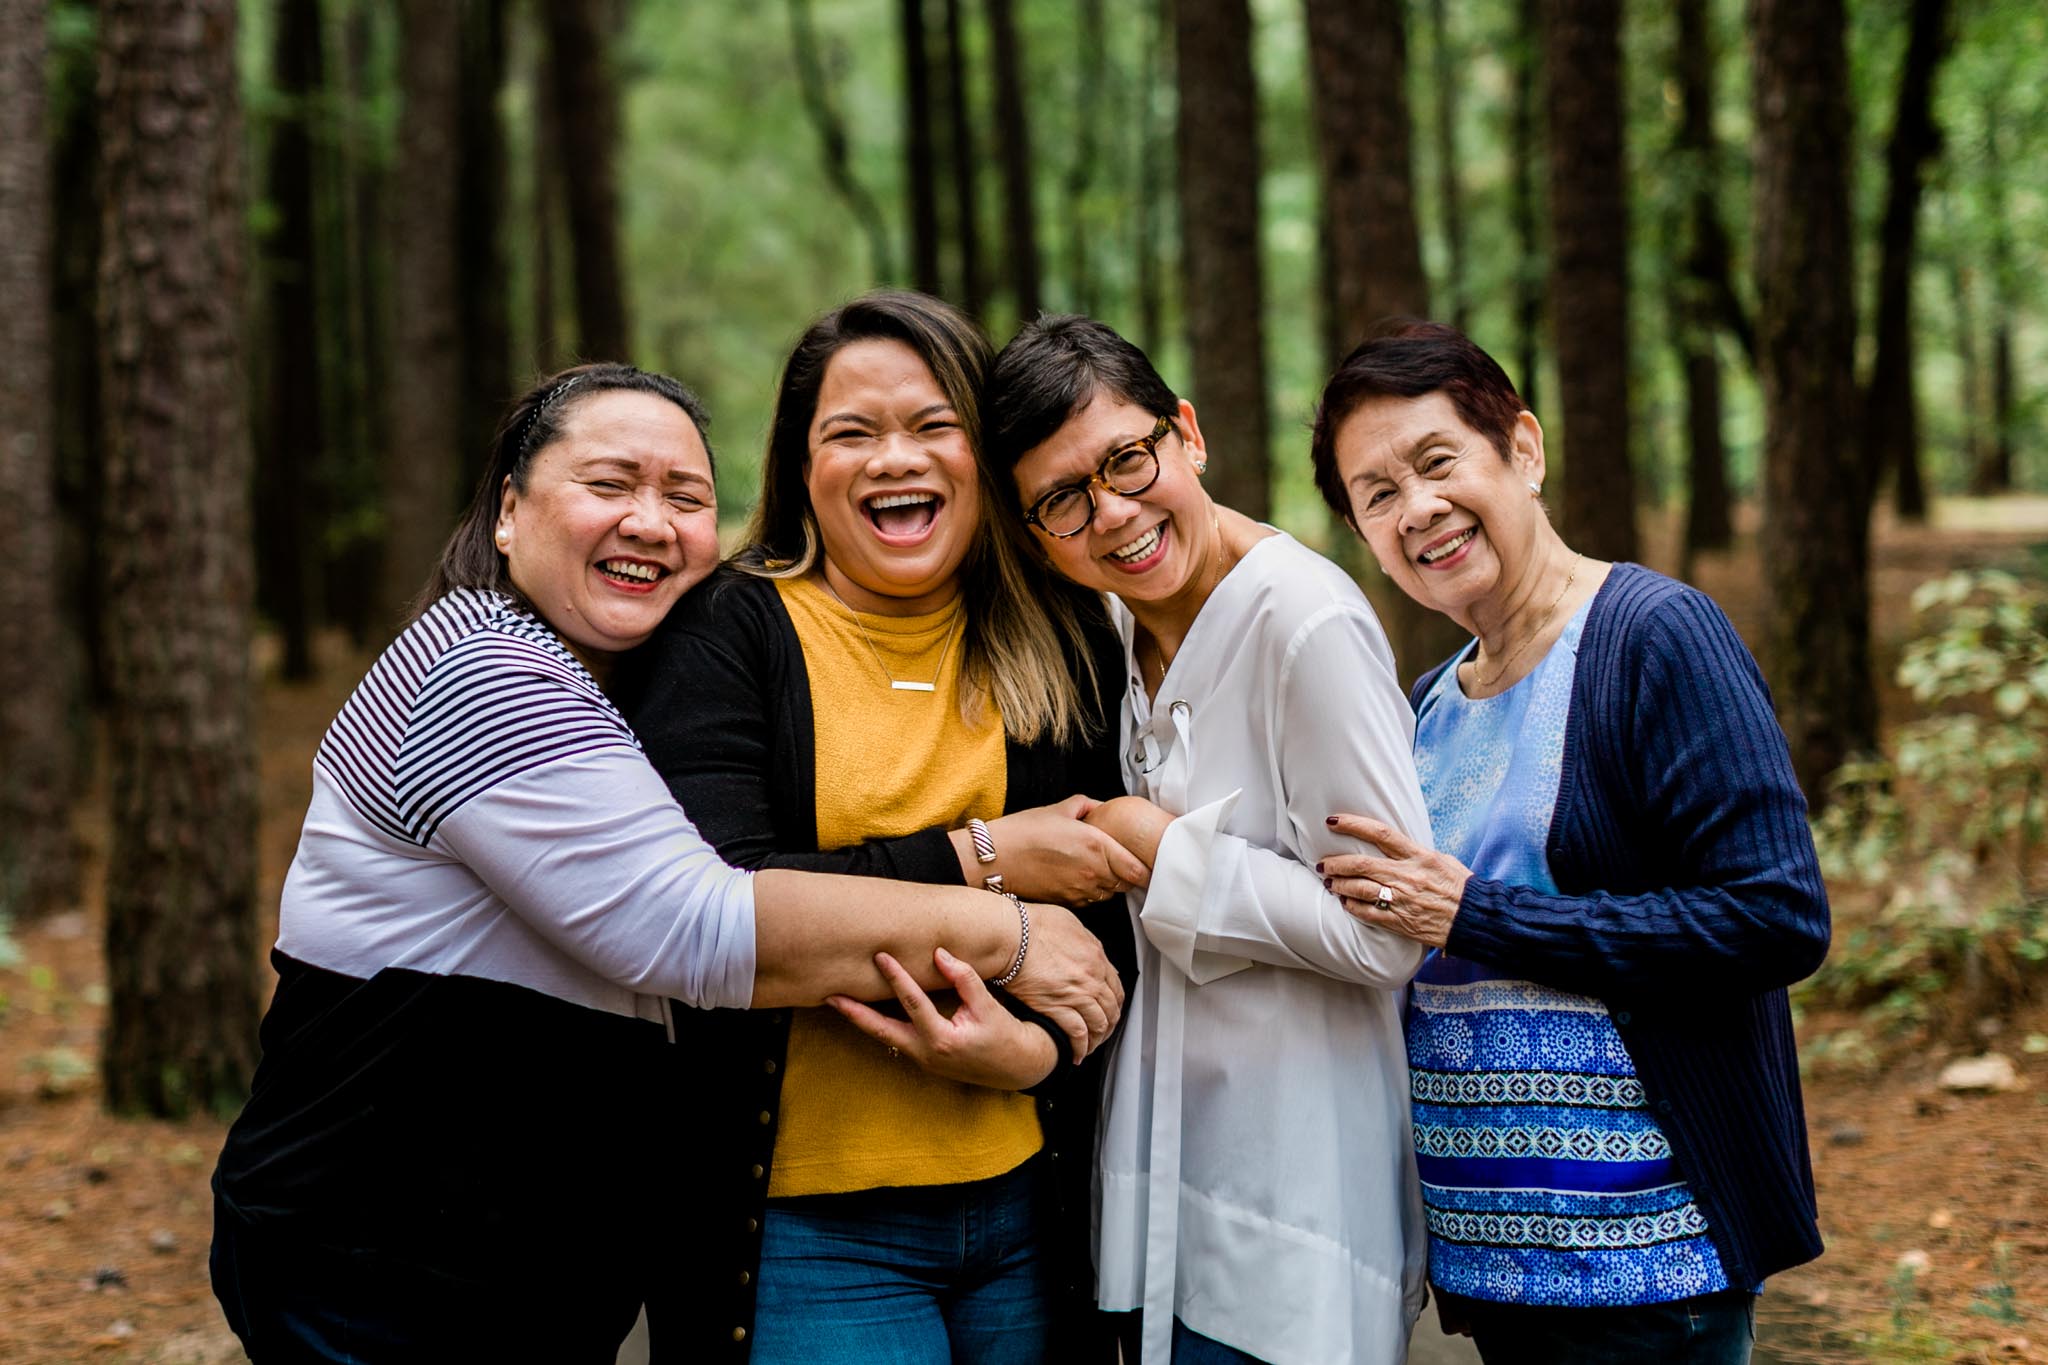 Raleigh Maternity Photographer | By G. Lin Photography | Group of women smiling and laughing at Umstead Park